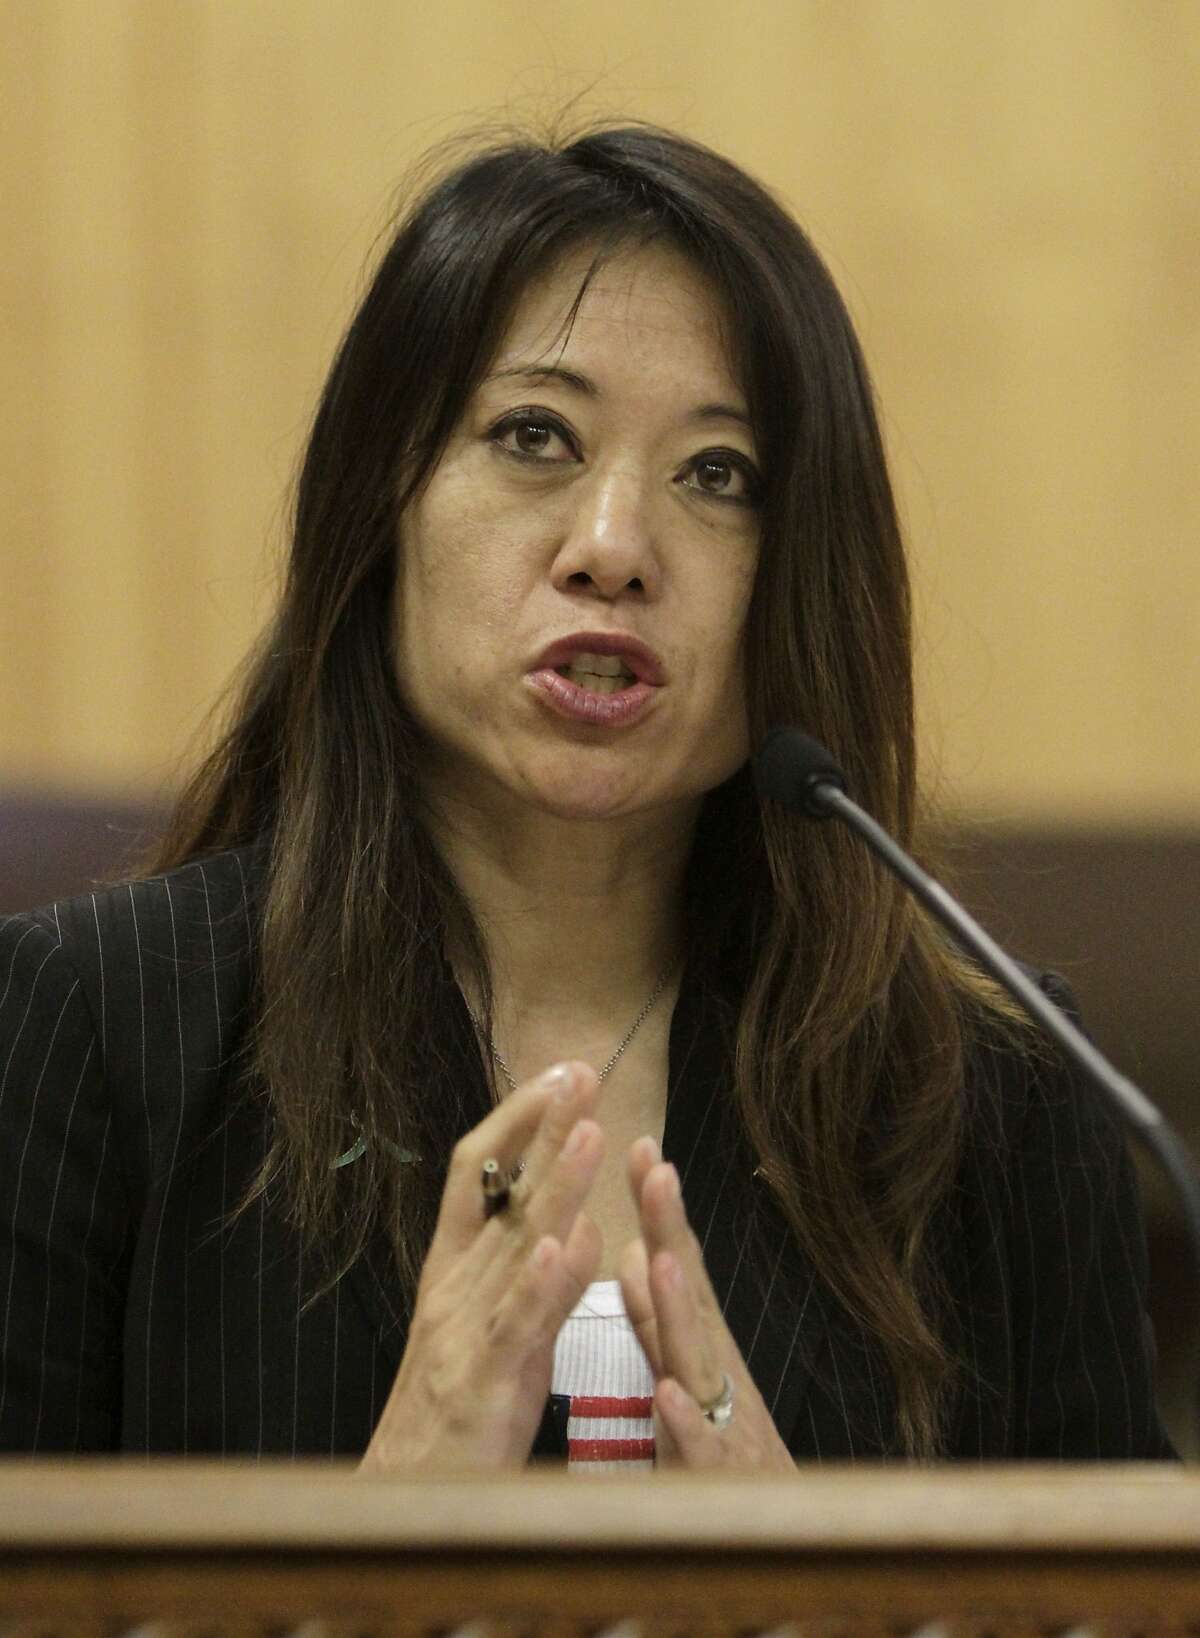 Assemblywoman Fiona Ma, D-San Francisco, urges lawmakers to approve her measure to increase the pay of the harbor pilots who navigate massive cargo ships through San Franciso Bay, during a hearing at the Capitol in Sacramento, Calif., Tuesday, June 14, 2011. The bill would raise the annual salary from about $400,000 annually. The Pacific Merchant Shipping Association contends San Francisco Bay's pilots are among the best paid in the industry and that any increase will hurt Northern California ports' competitiveness. (AP Photo/Rich Pedroncelli)